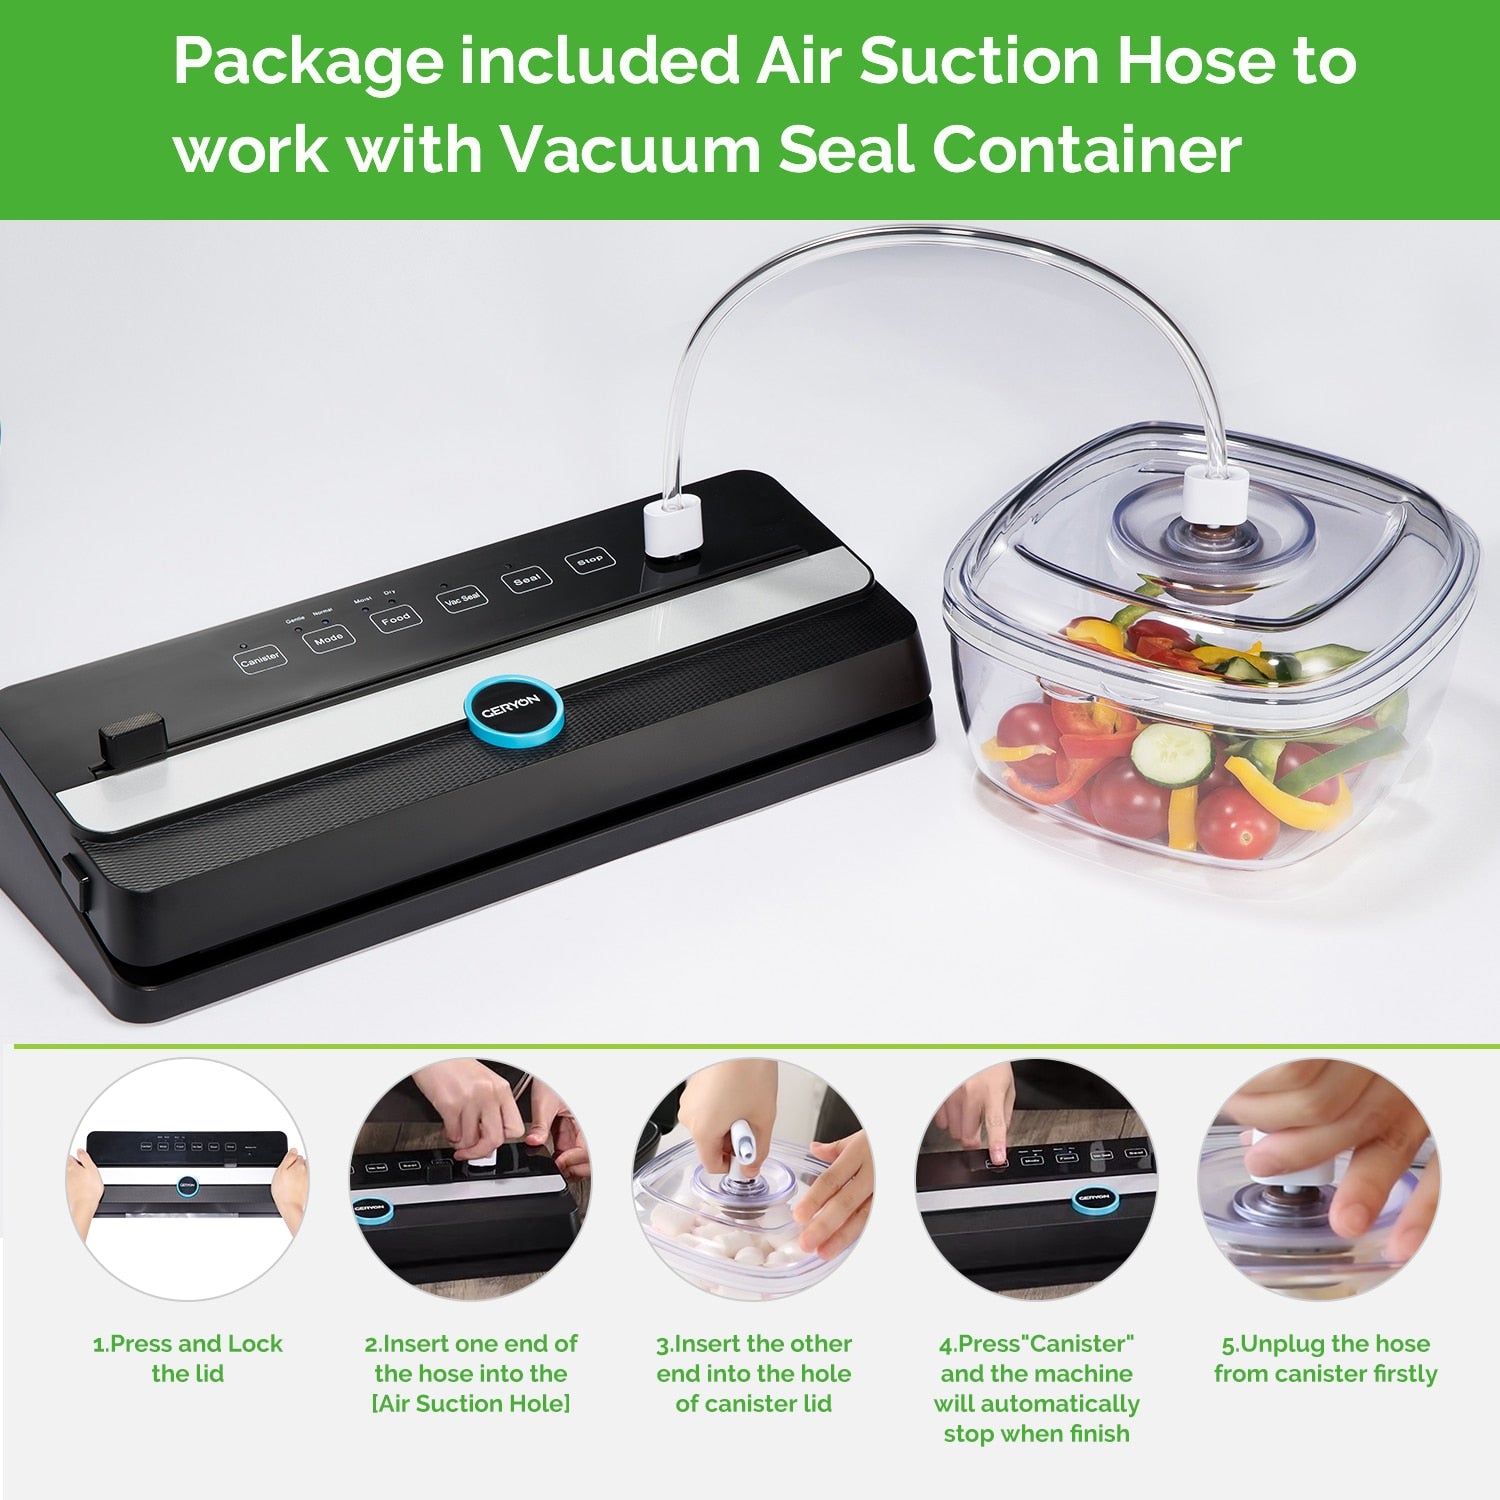 Automatic Vacuum Sealer package includes air suction hose to work with vacuum seal container